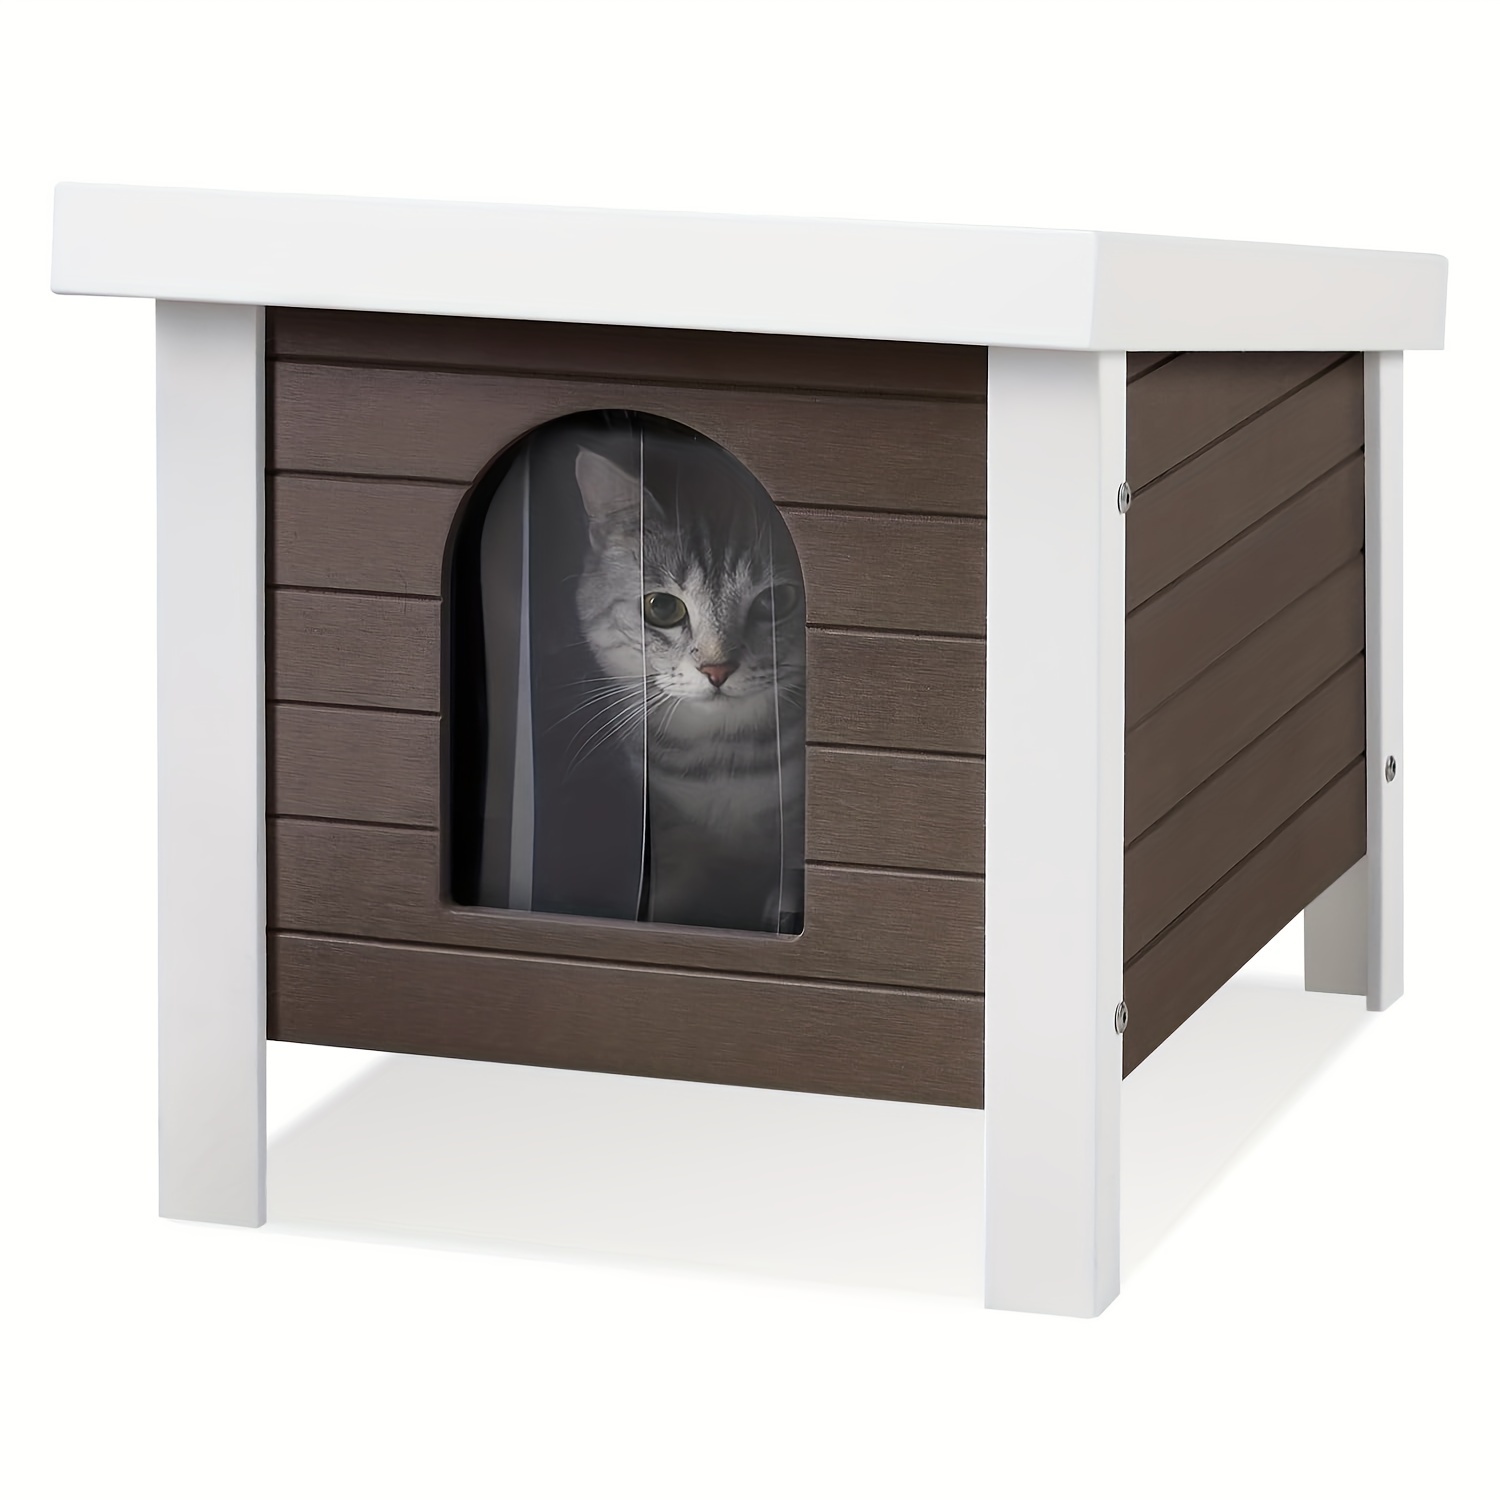 

Efurden Weatherproof Cat House For Outdoor Cats, Recyclable Material Ps Outside Shelter With Open Roof, Insulated And Thermostatic Feral Cat House, Brown